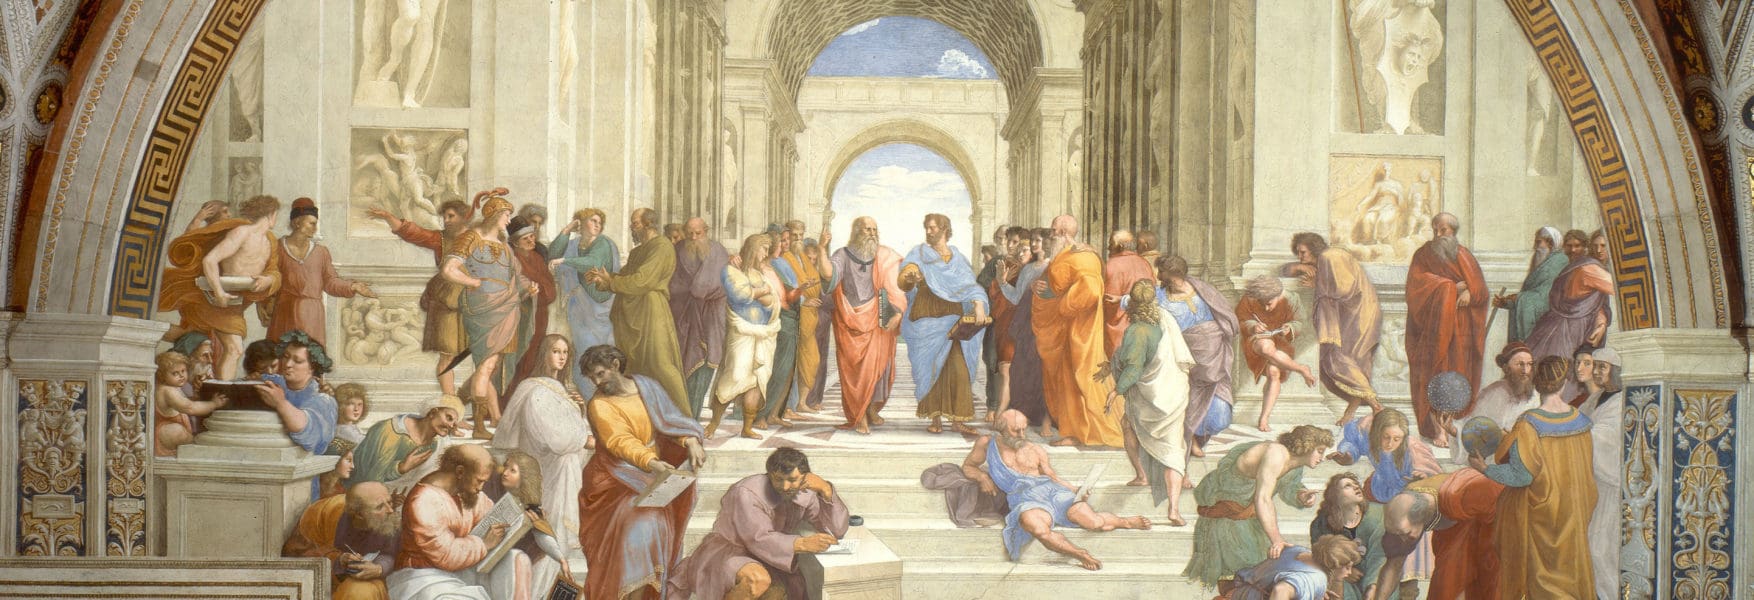 The School of Athens Painting